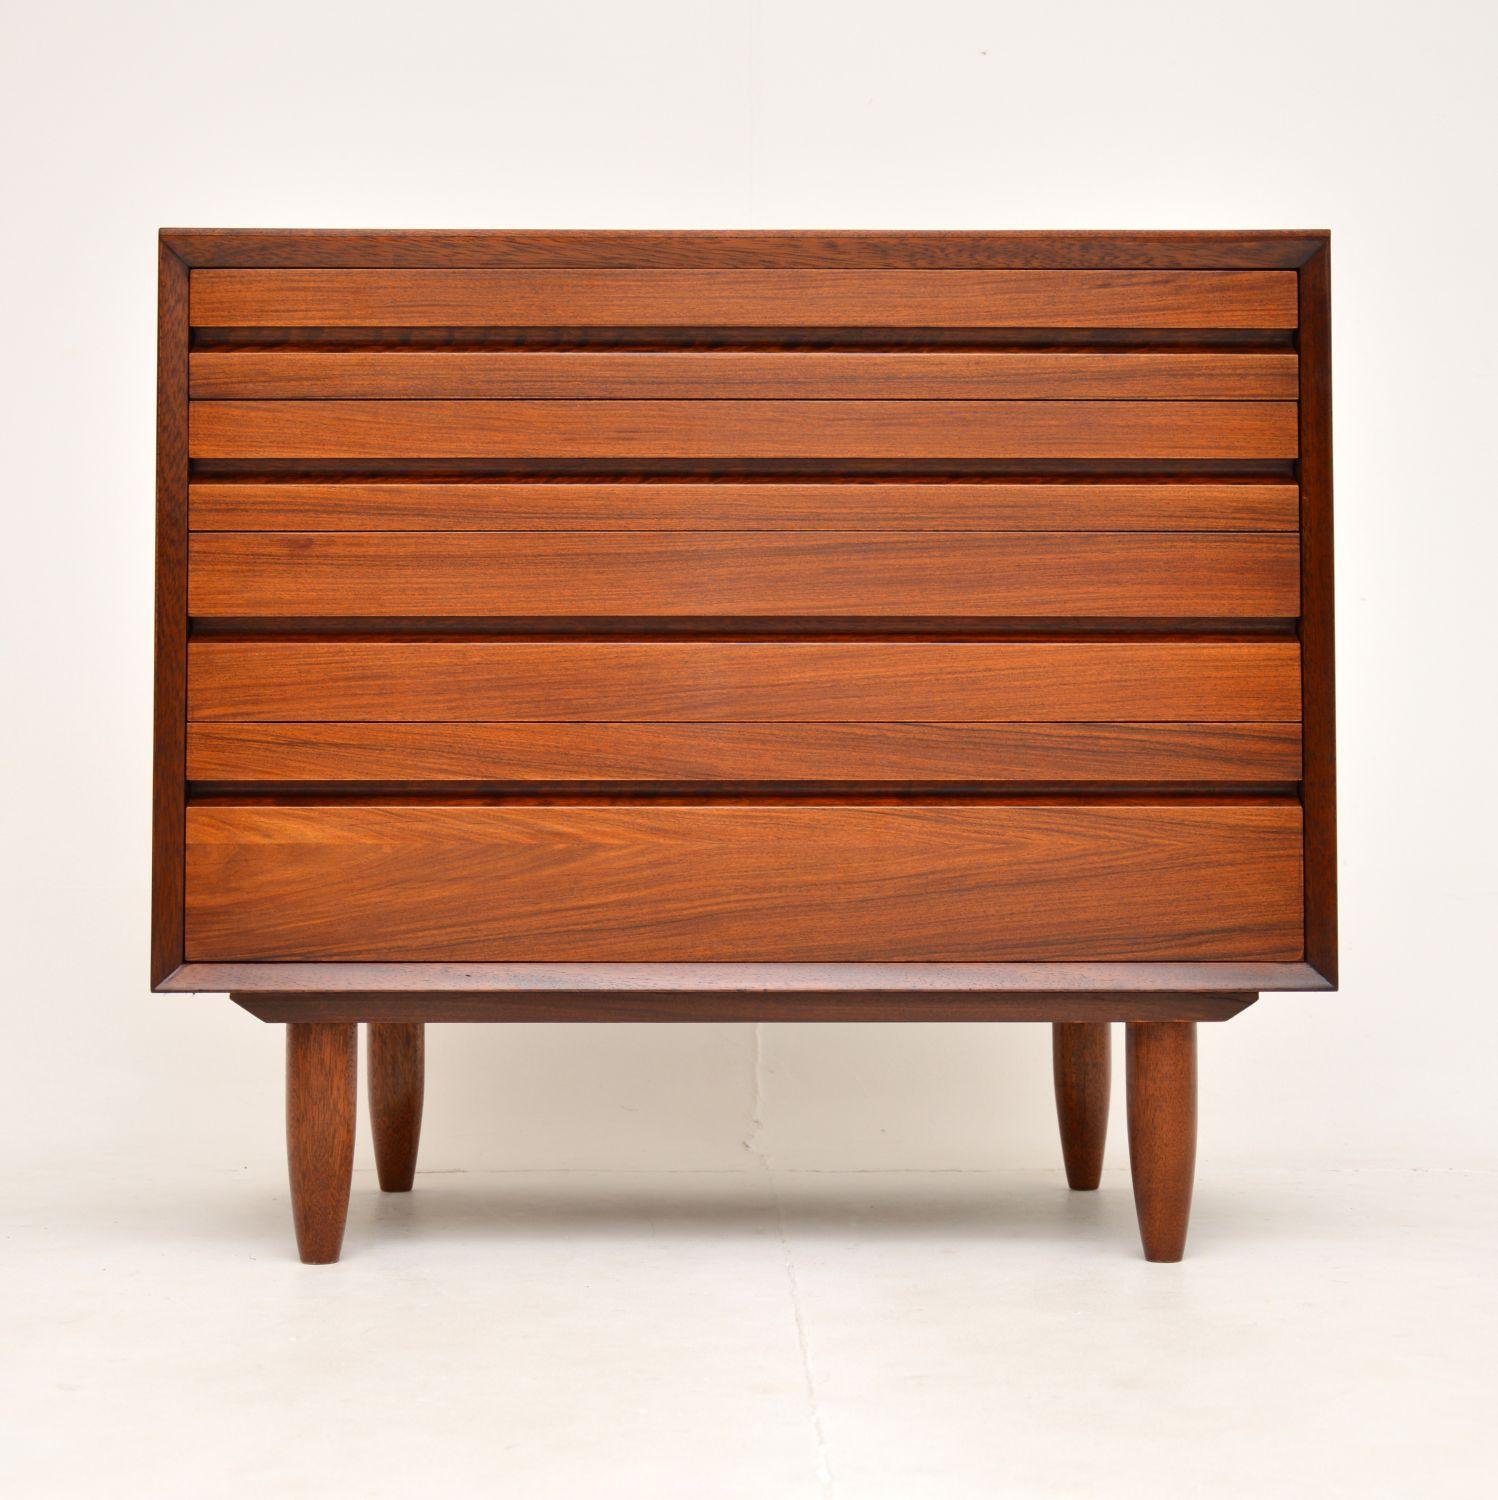 A superb vintage Danish chest of drawers. This was designed by Poul Cadovius and was made in Denmark by Cado, it dates from the 1960’s.

The quality is outstanding, this is so well made and is a very useful size. The wood has a gorgeous colour and